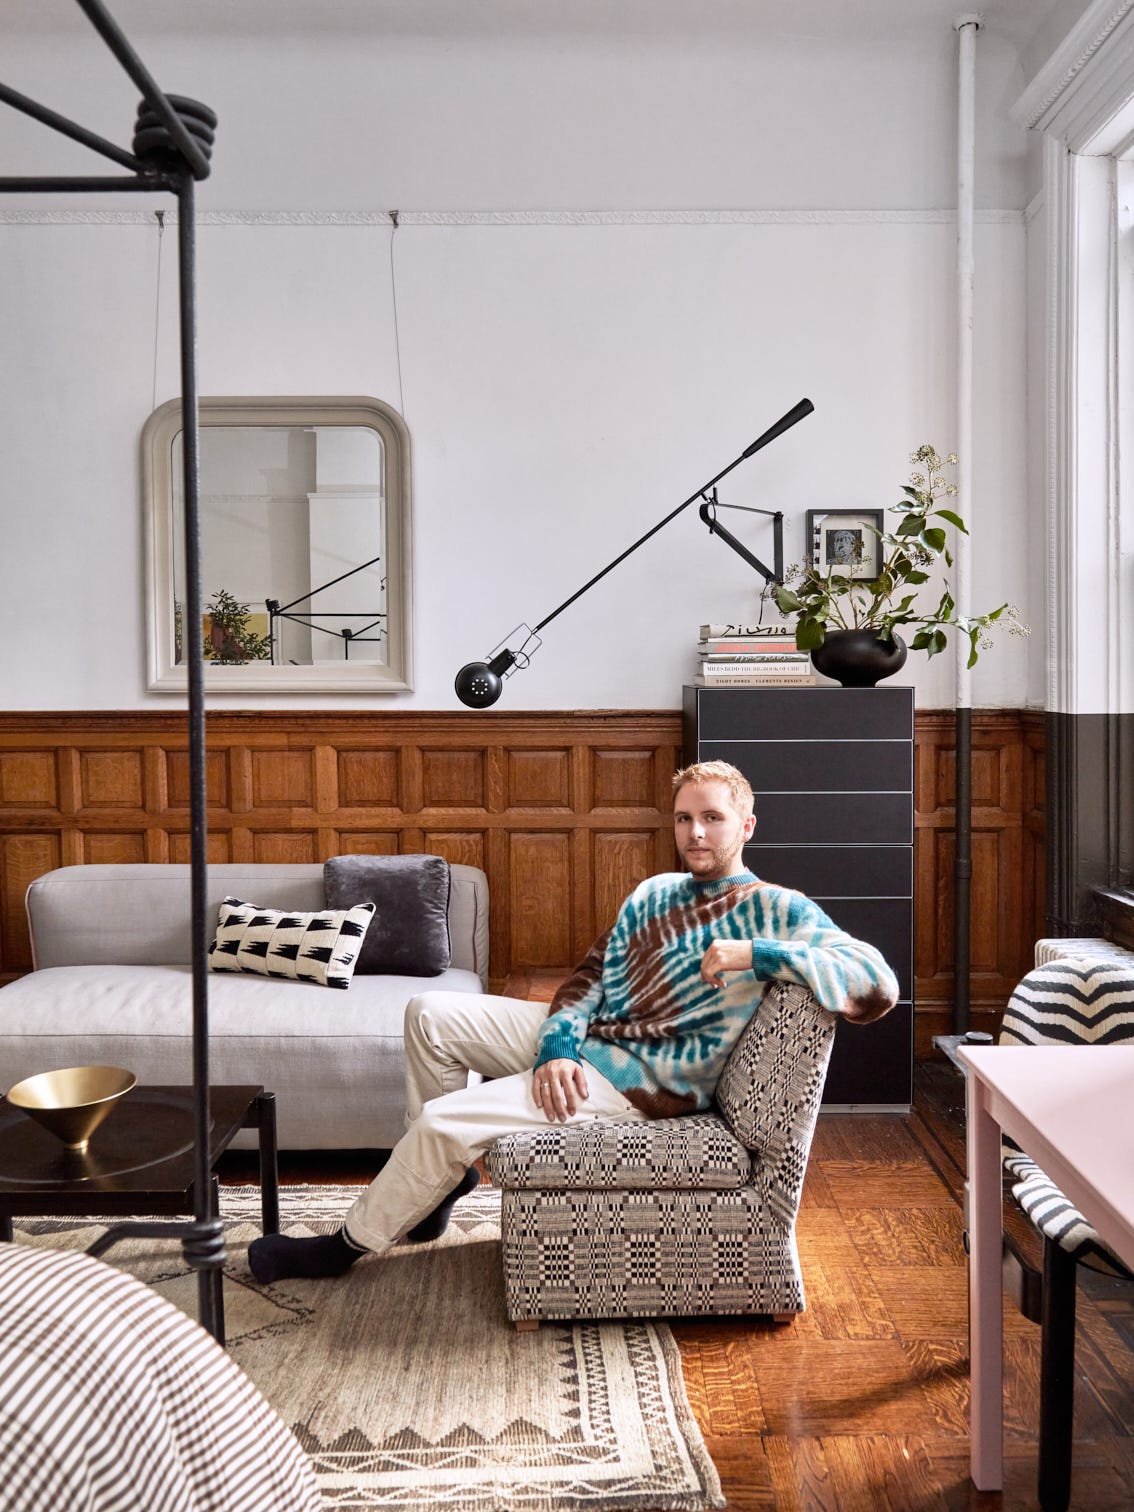 This Editor's Harlem Studio Is Closet-less and Tiny, But the Wainscoting Alone Makes Up for It